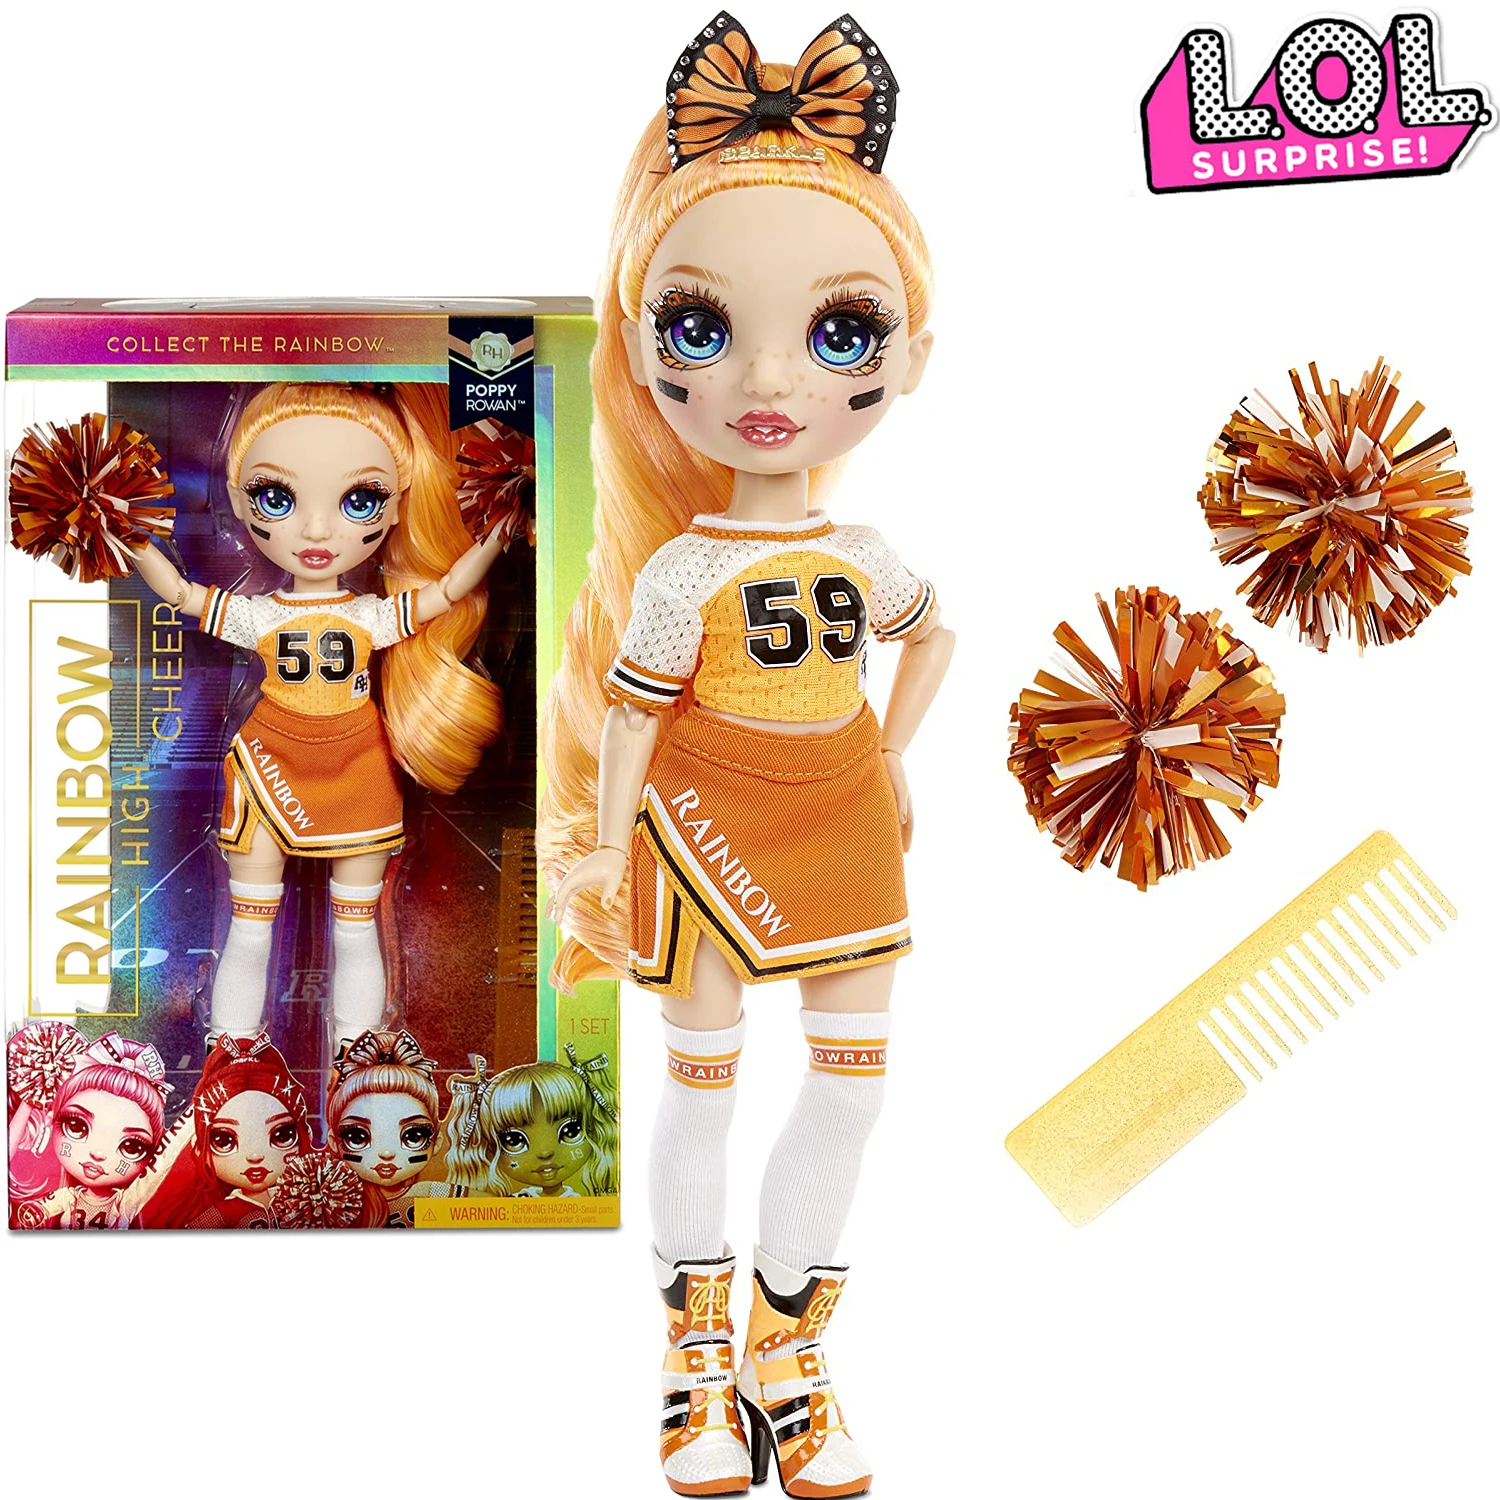 Great Gift for Kids 6-12 Years Old Orange Cheerleader Fashion Doll with 2 Pom Poms and Doll Accessories Rainbow High Cheer Poppy Rowan 